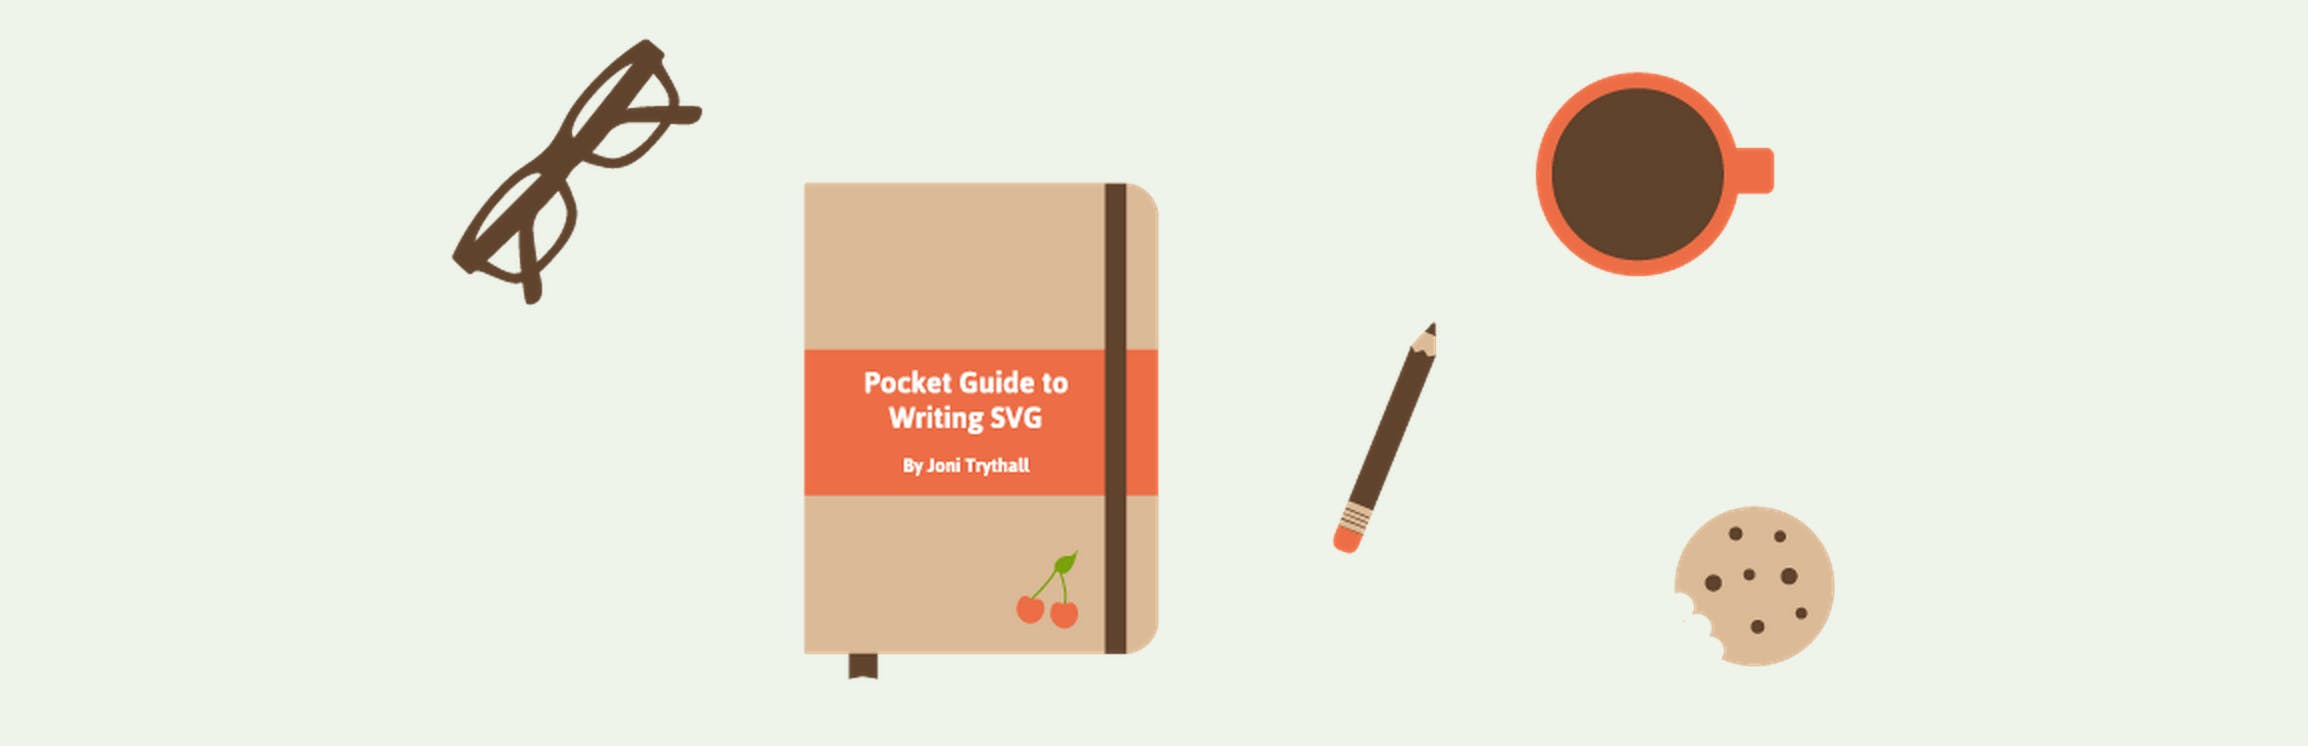 Pocket Guide to Writing SVG media 1